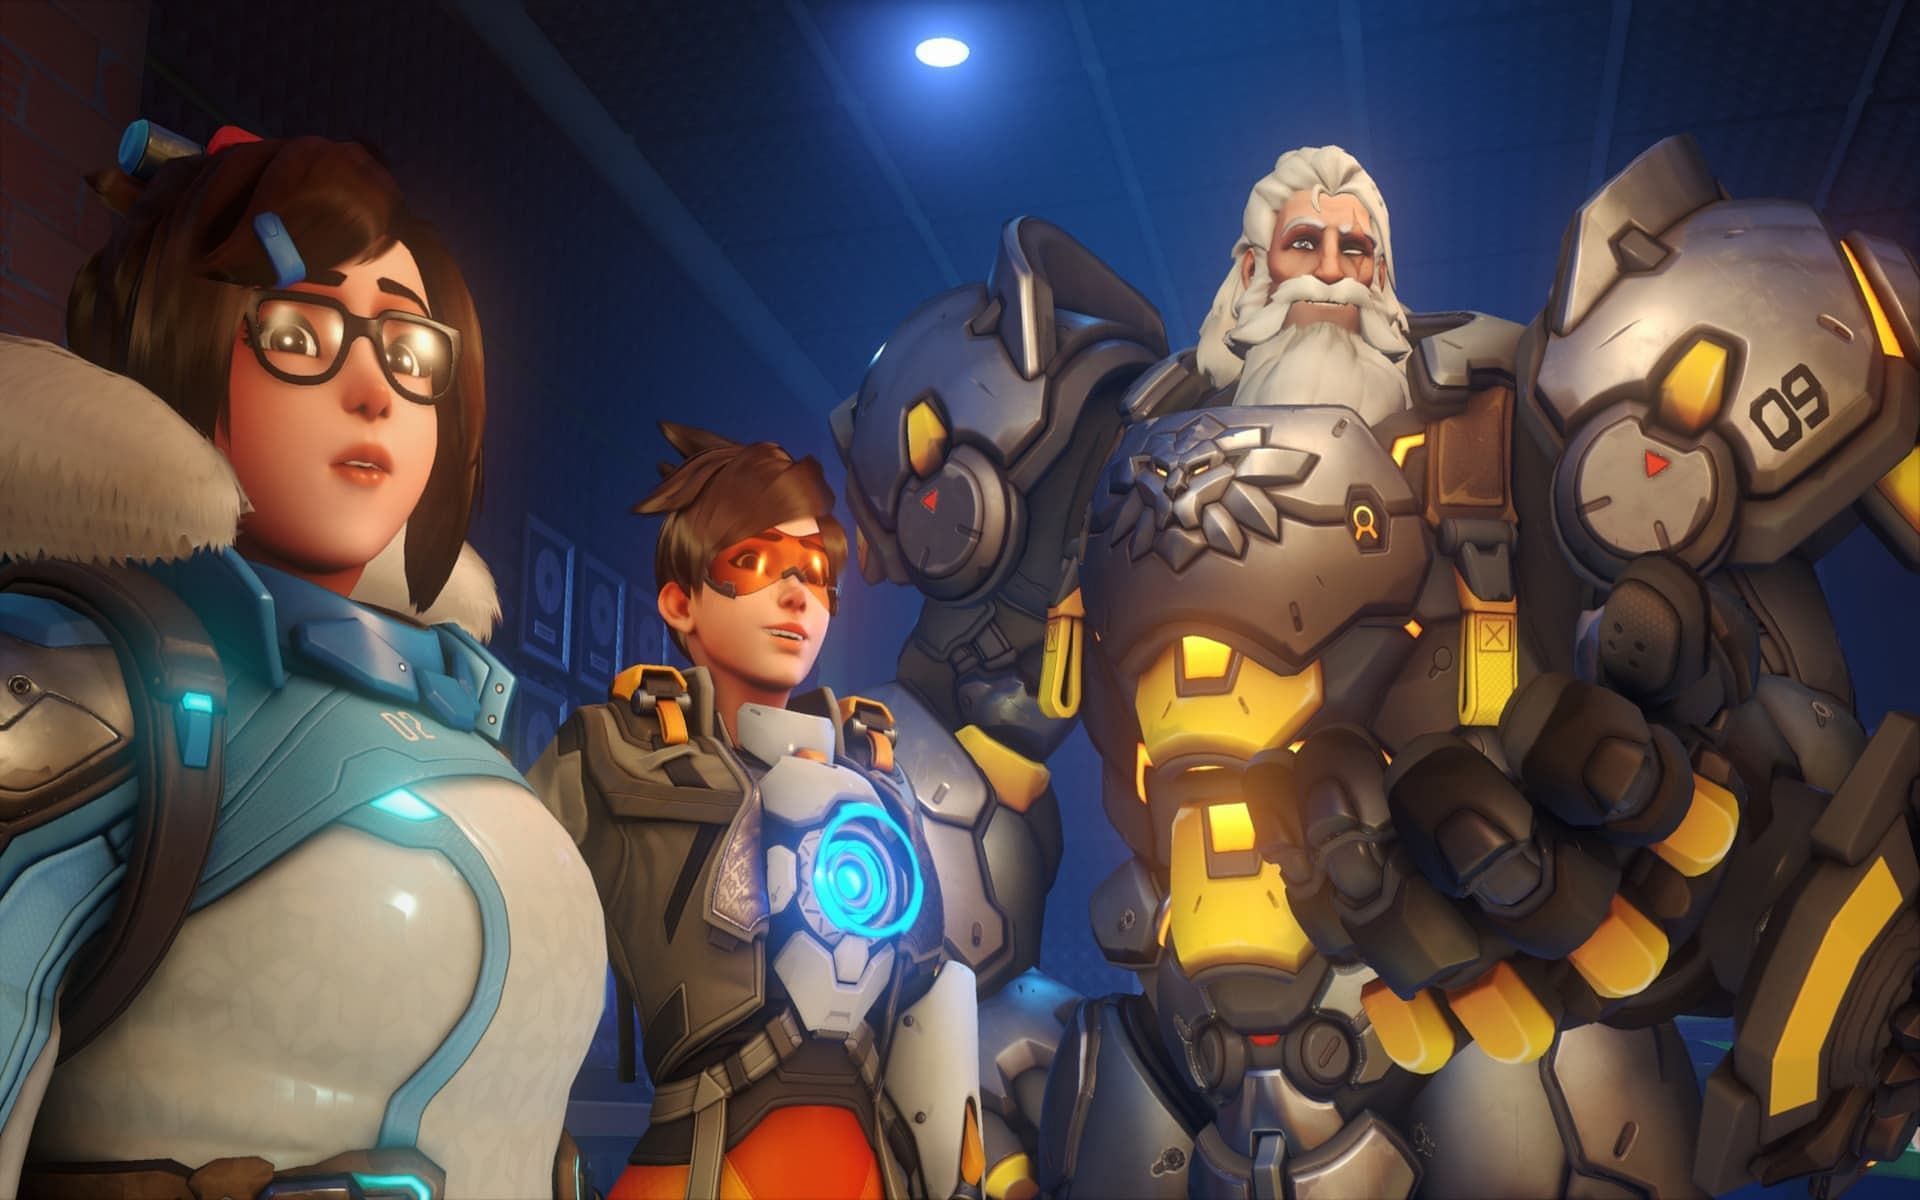 Players can expect plenty of customization in Overwatch 2 (Image via Blizzard Entertainment)